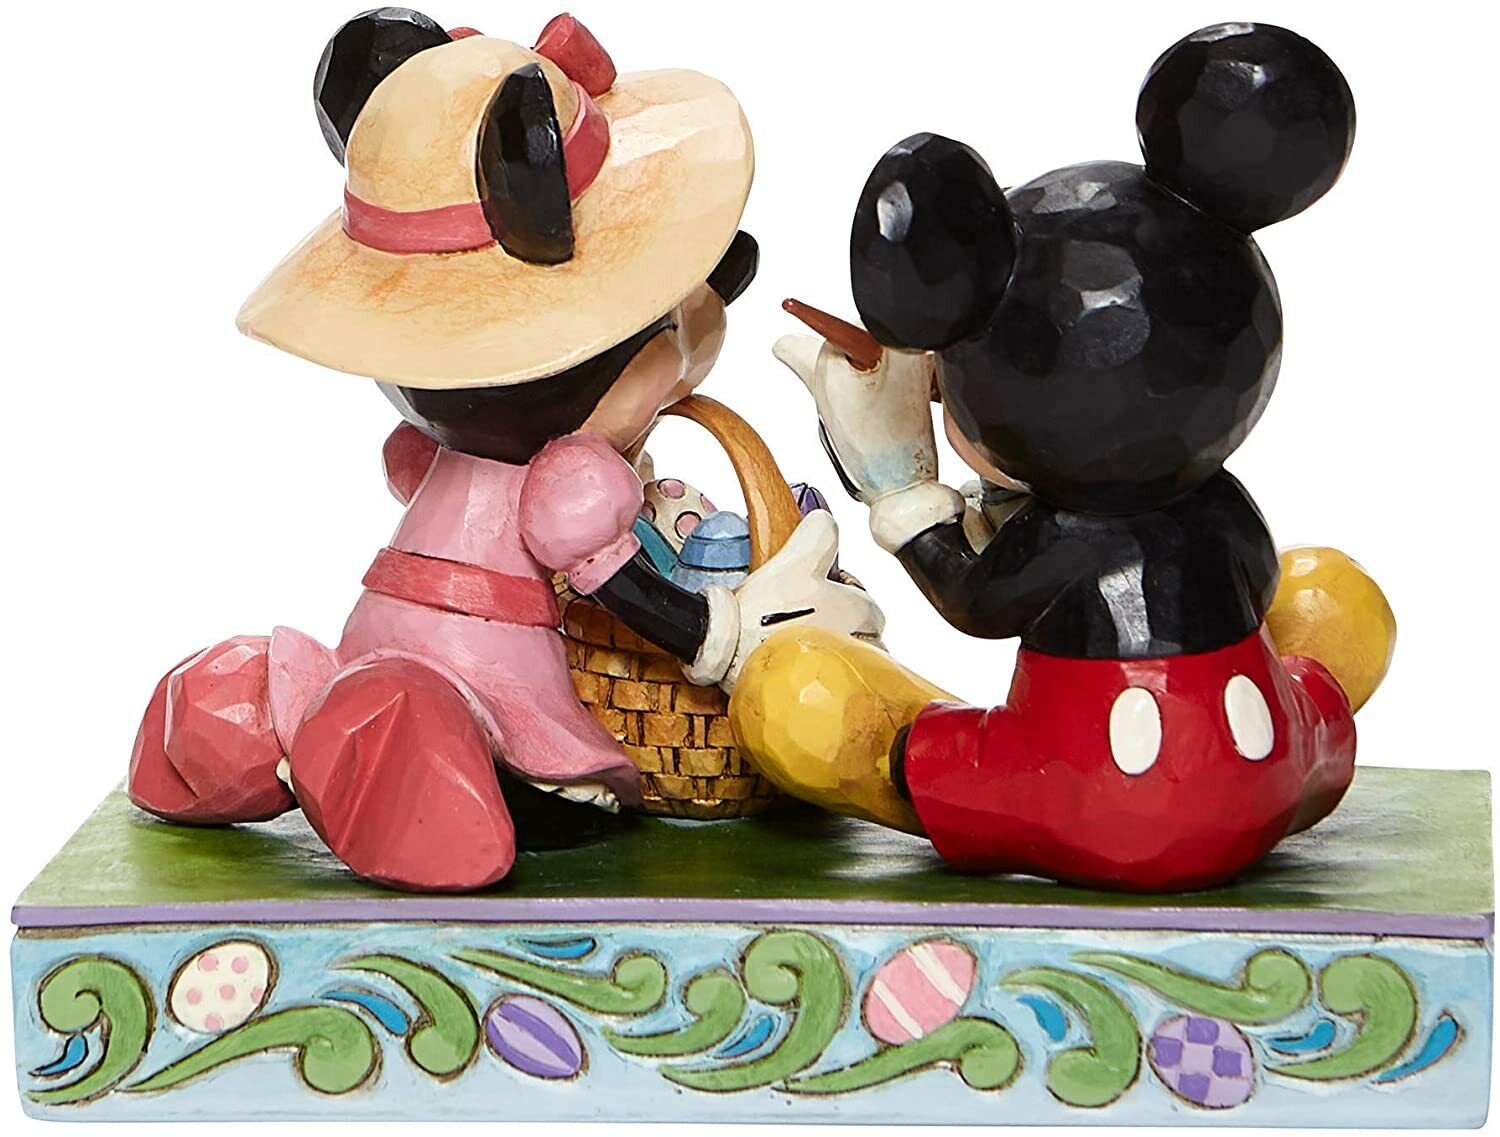 Disney Traditions Easter Artistry Figurine - Mickey and Minnie - Limited Edition